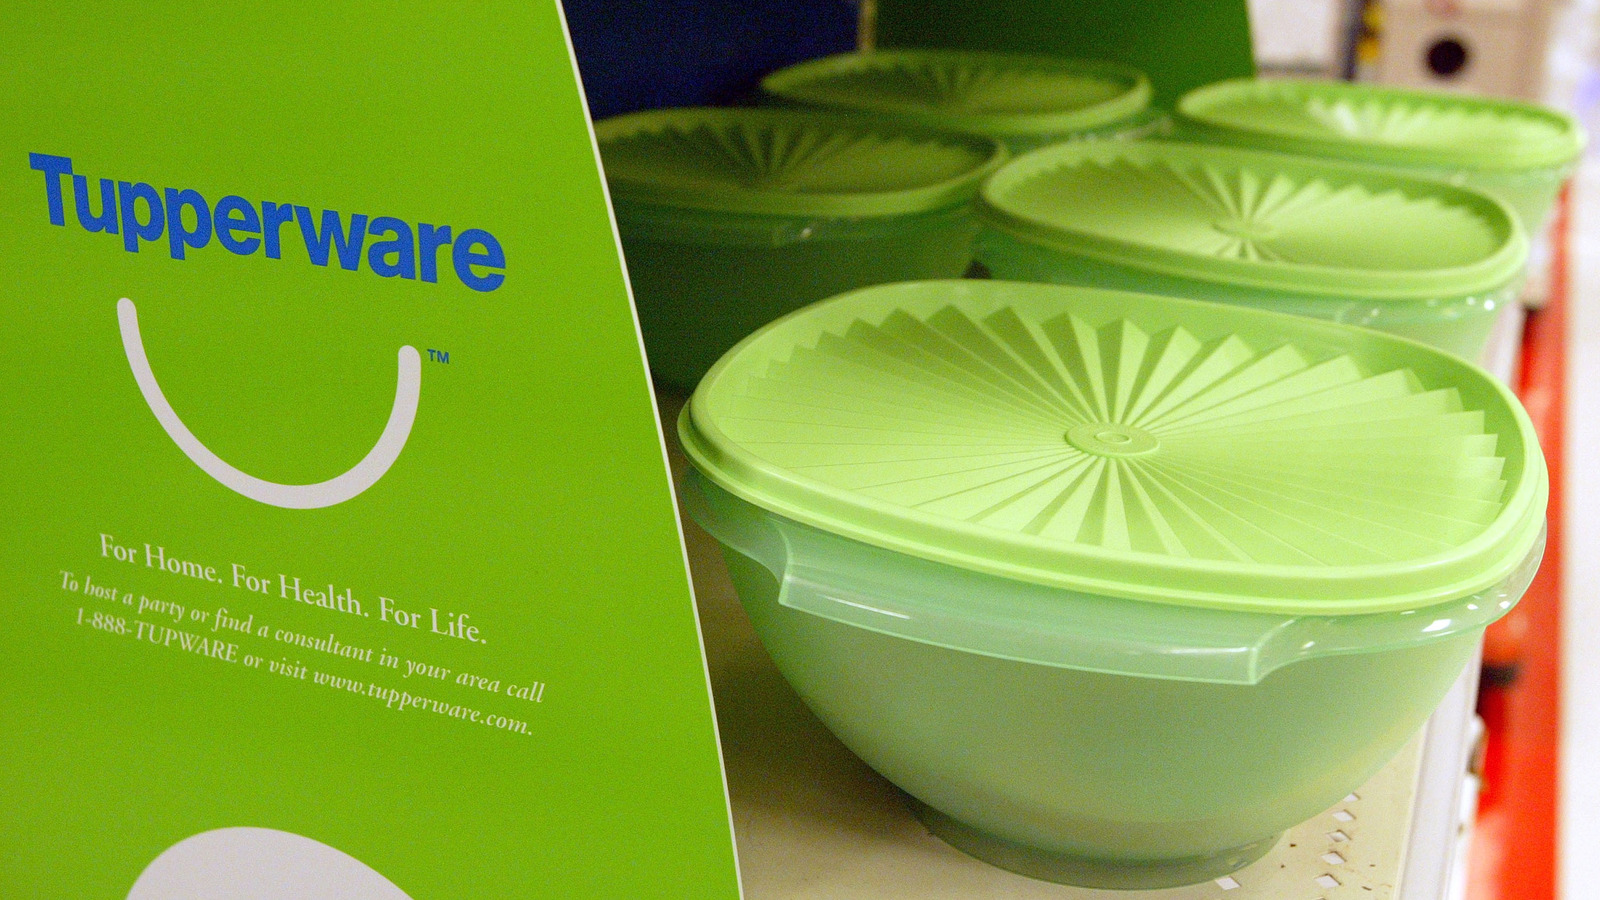 New products coming soon. Tupperware for all ware..